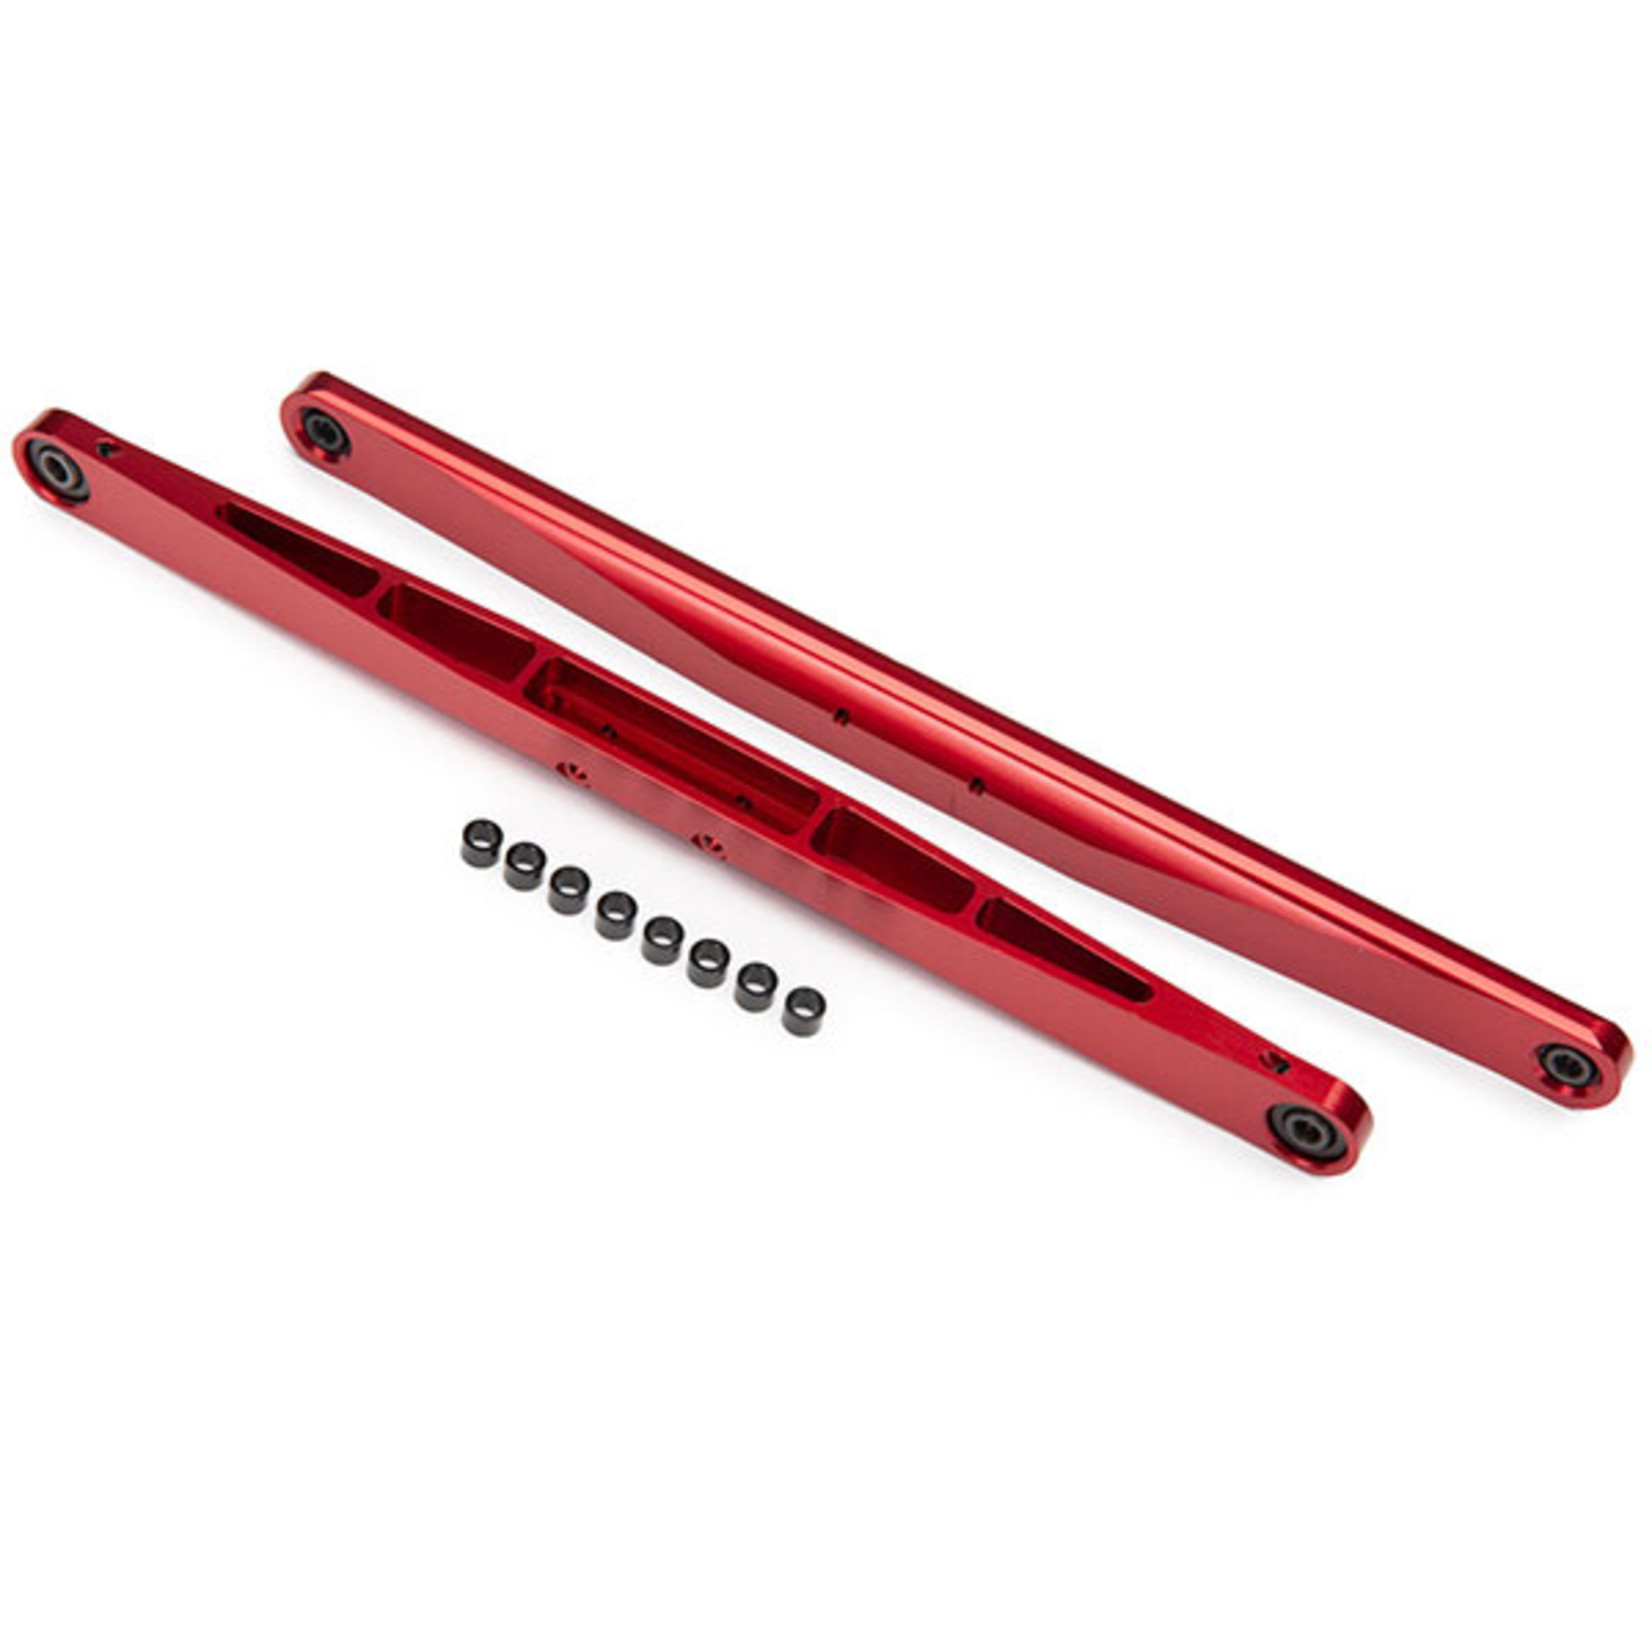 Traxxas 8544R - Trailing arm, aluminum (red-anodized) (2)